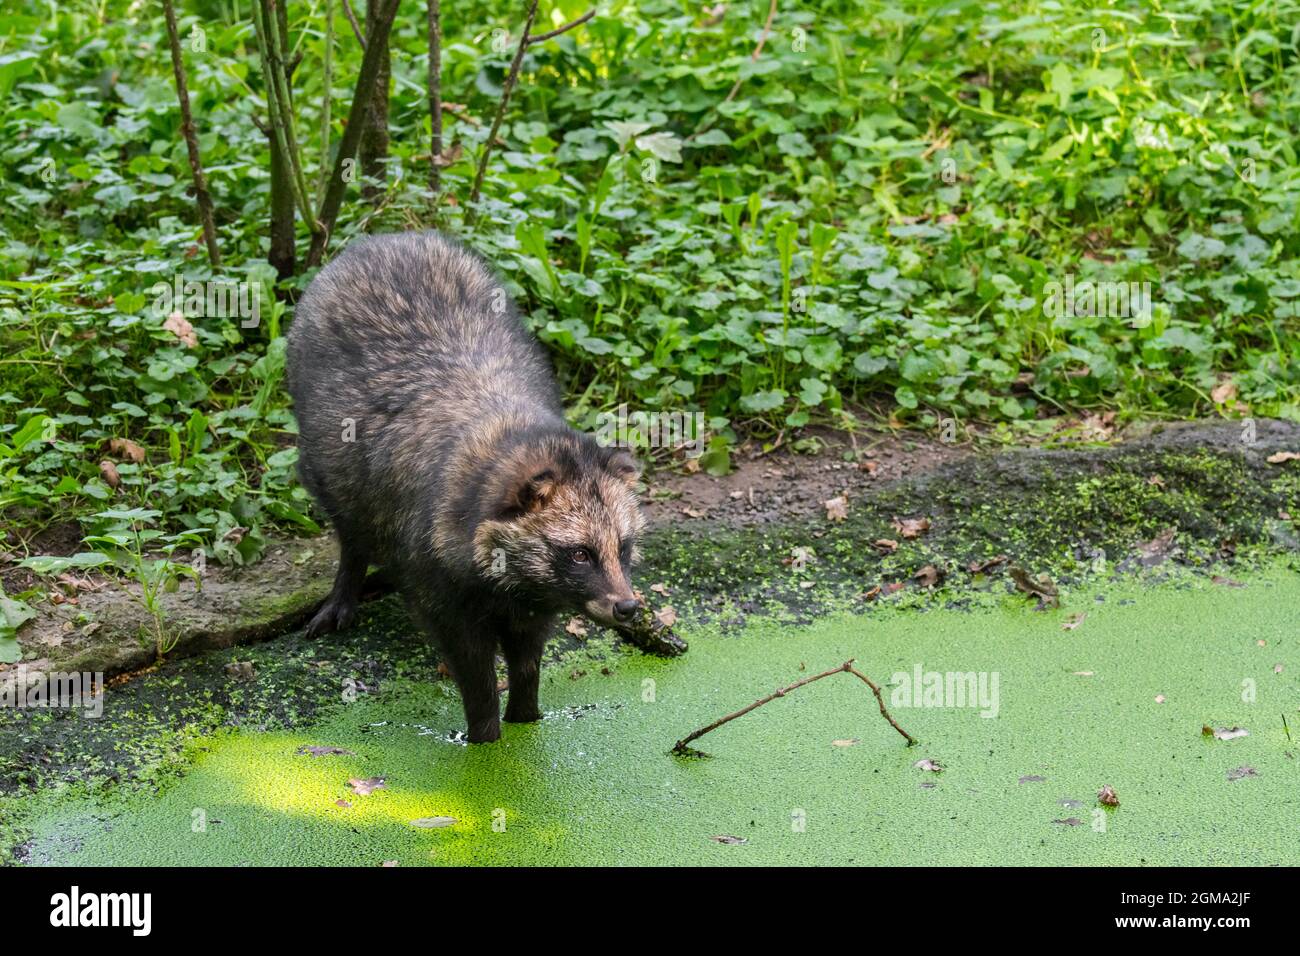 Raccoon dog (Nyctereutes procyonoides), hazardous invasive species in Germany, Belgium and other European countries drinking water from pond in forest Stock Photo